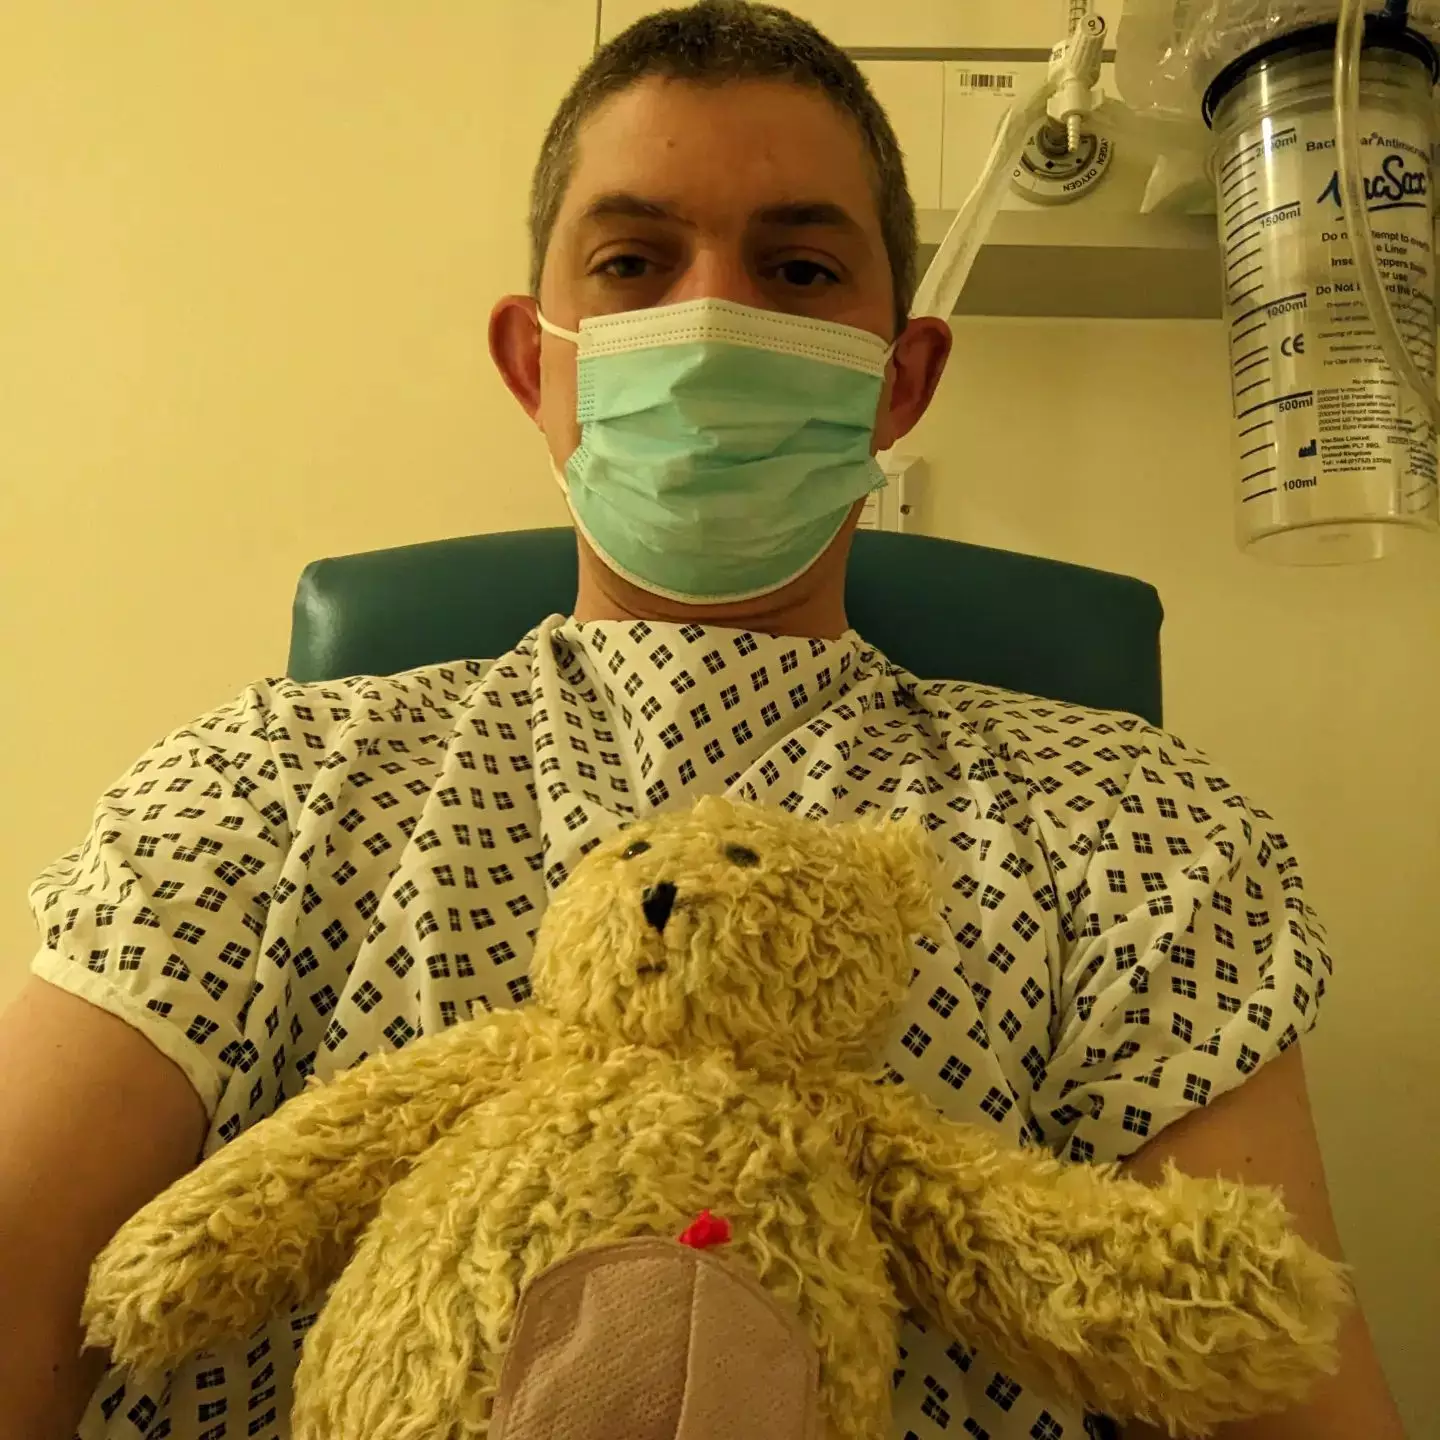 Merlin's bear will now be donated to a child with a stoma.